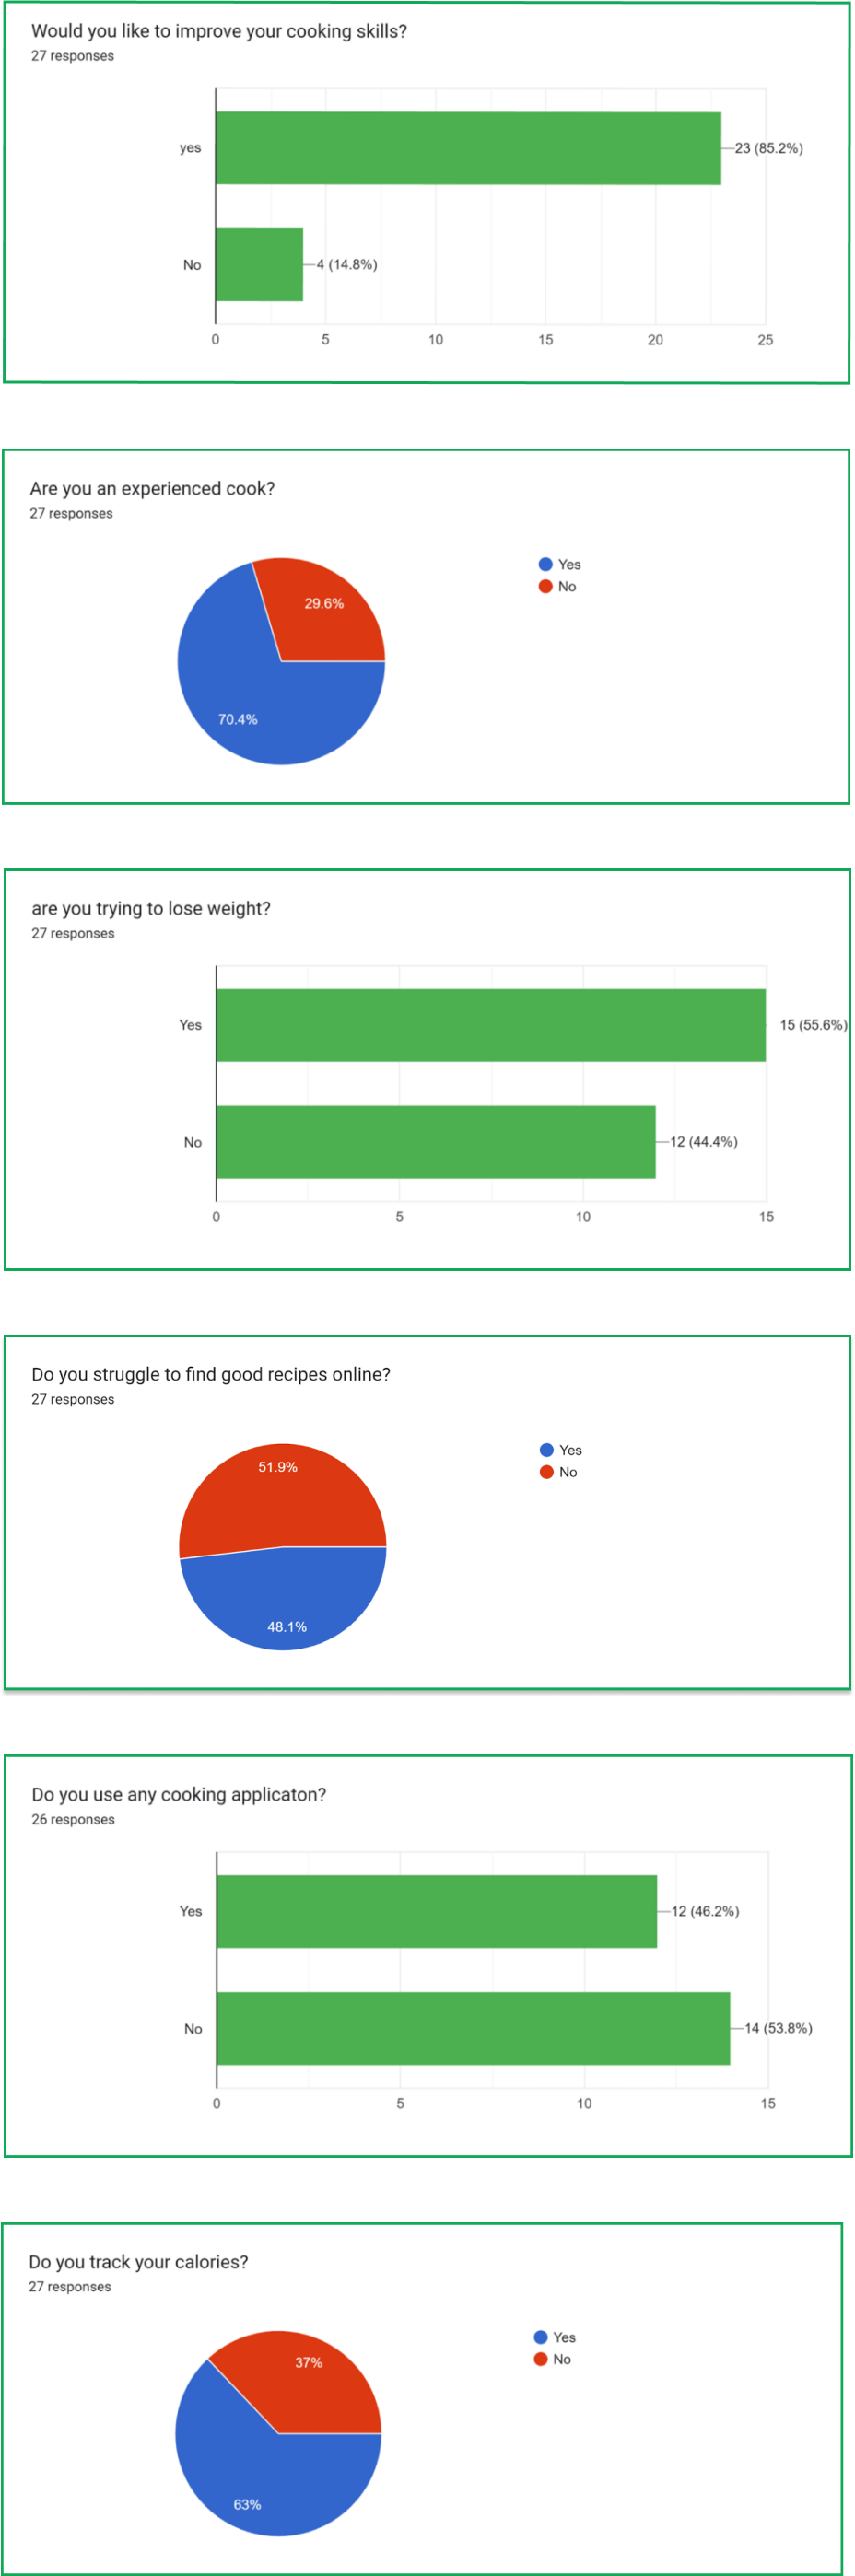 These are the images from the result of an online user survey.